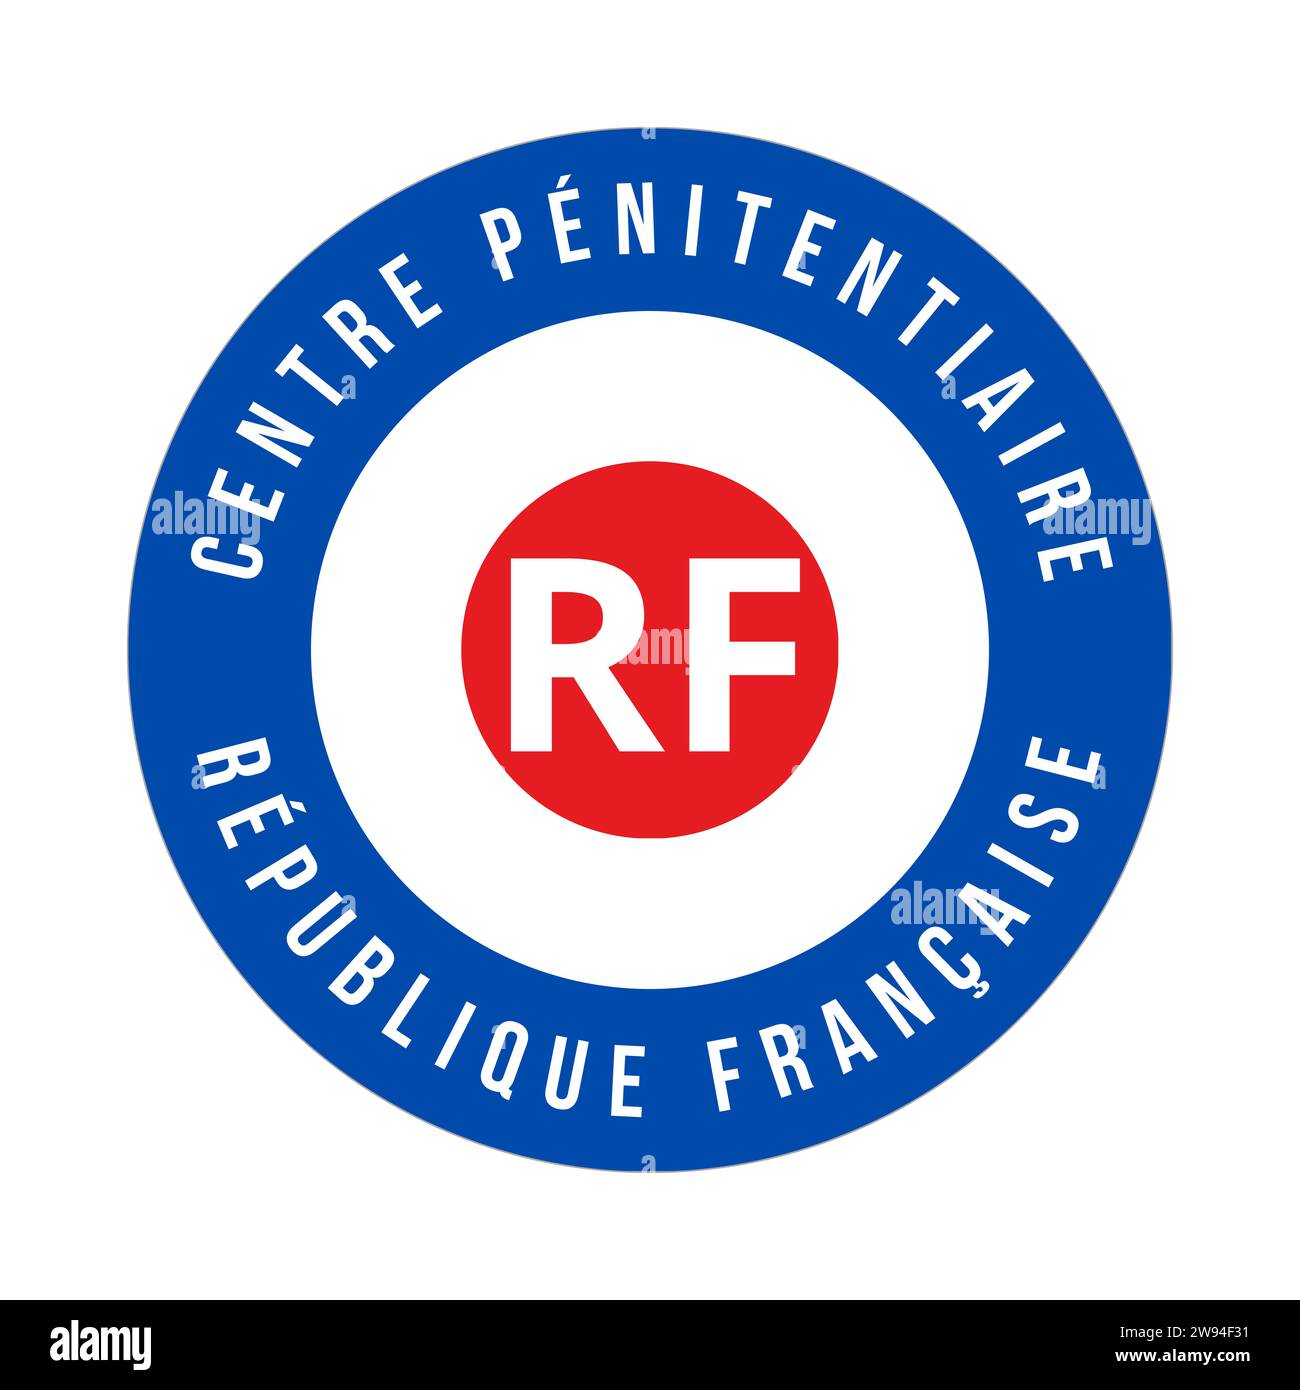 Penitentiary center symbol icon called centre penitentiaire in French language Stock Photo